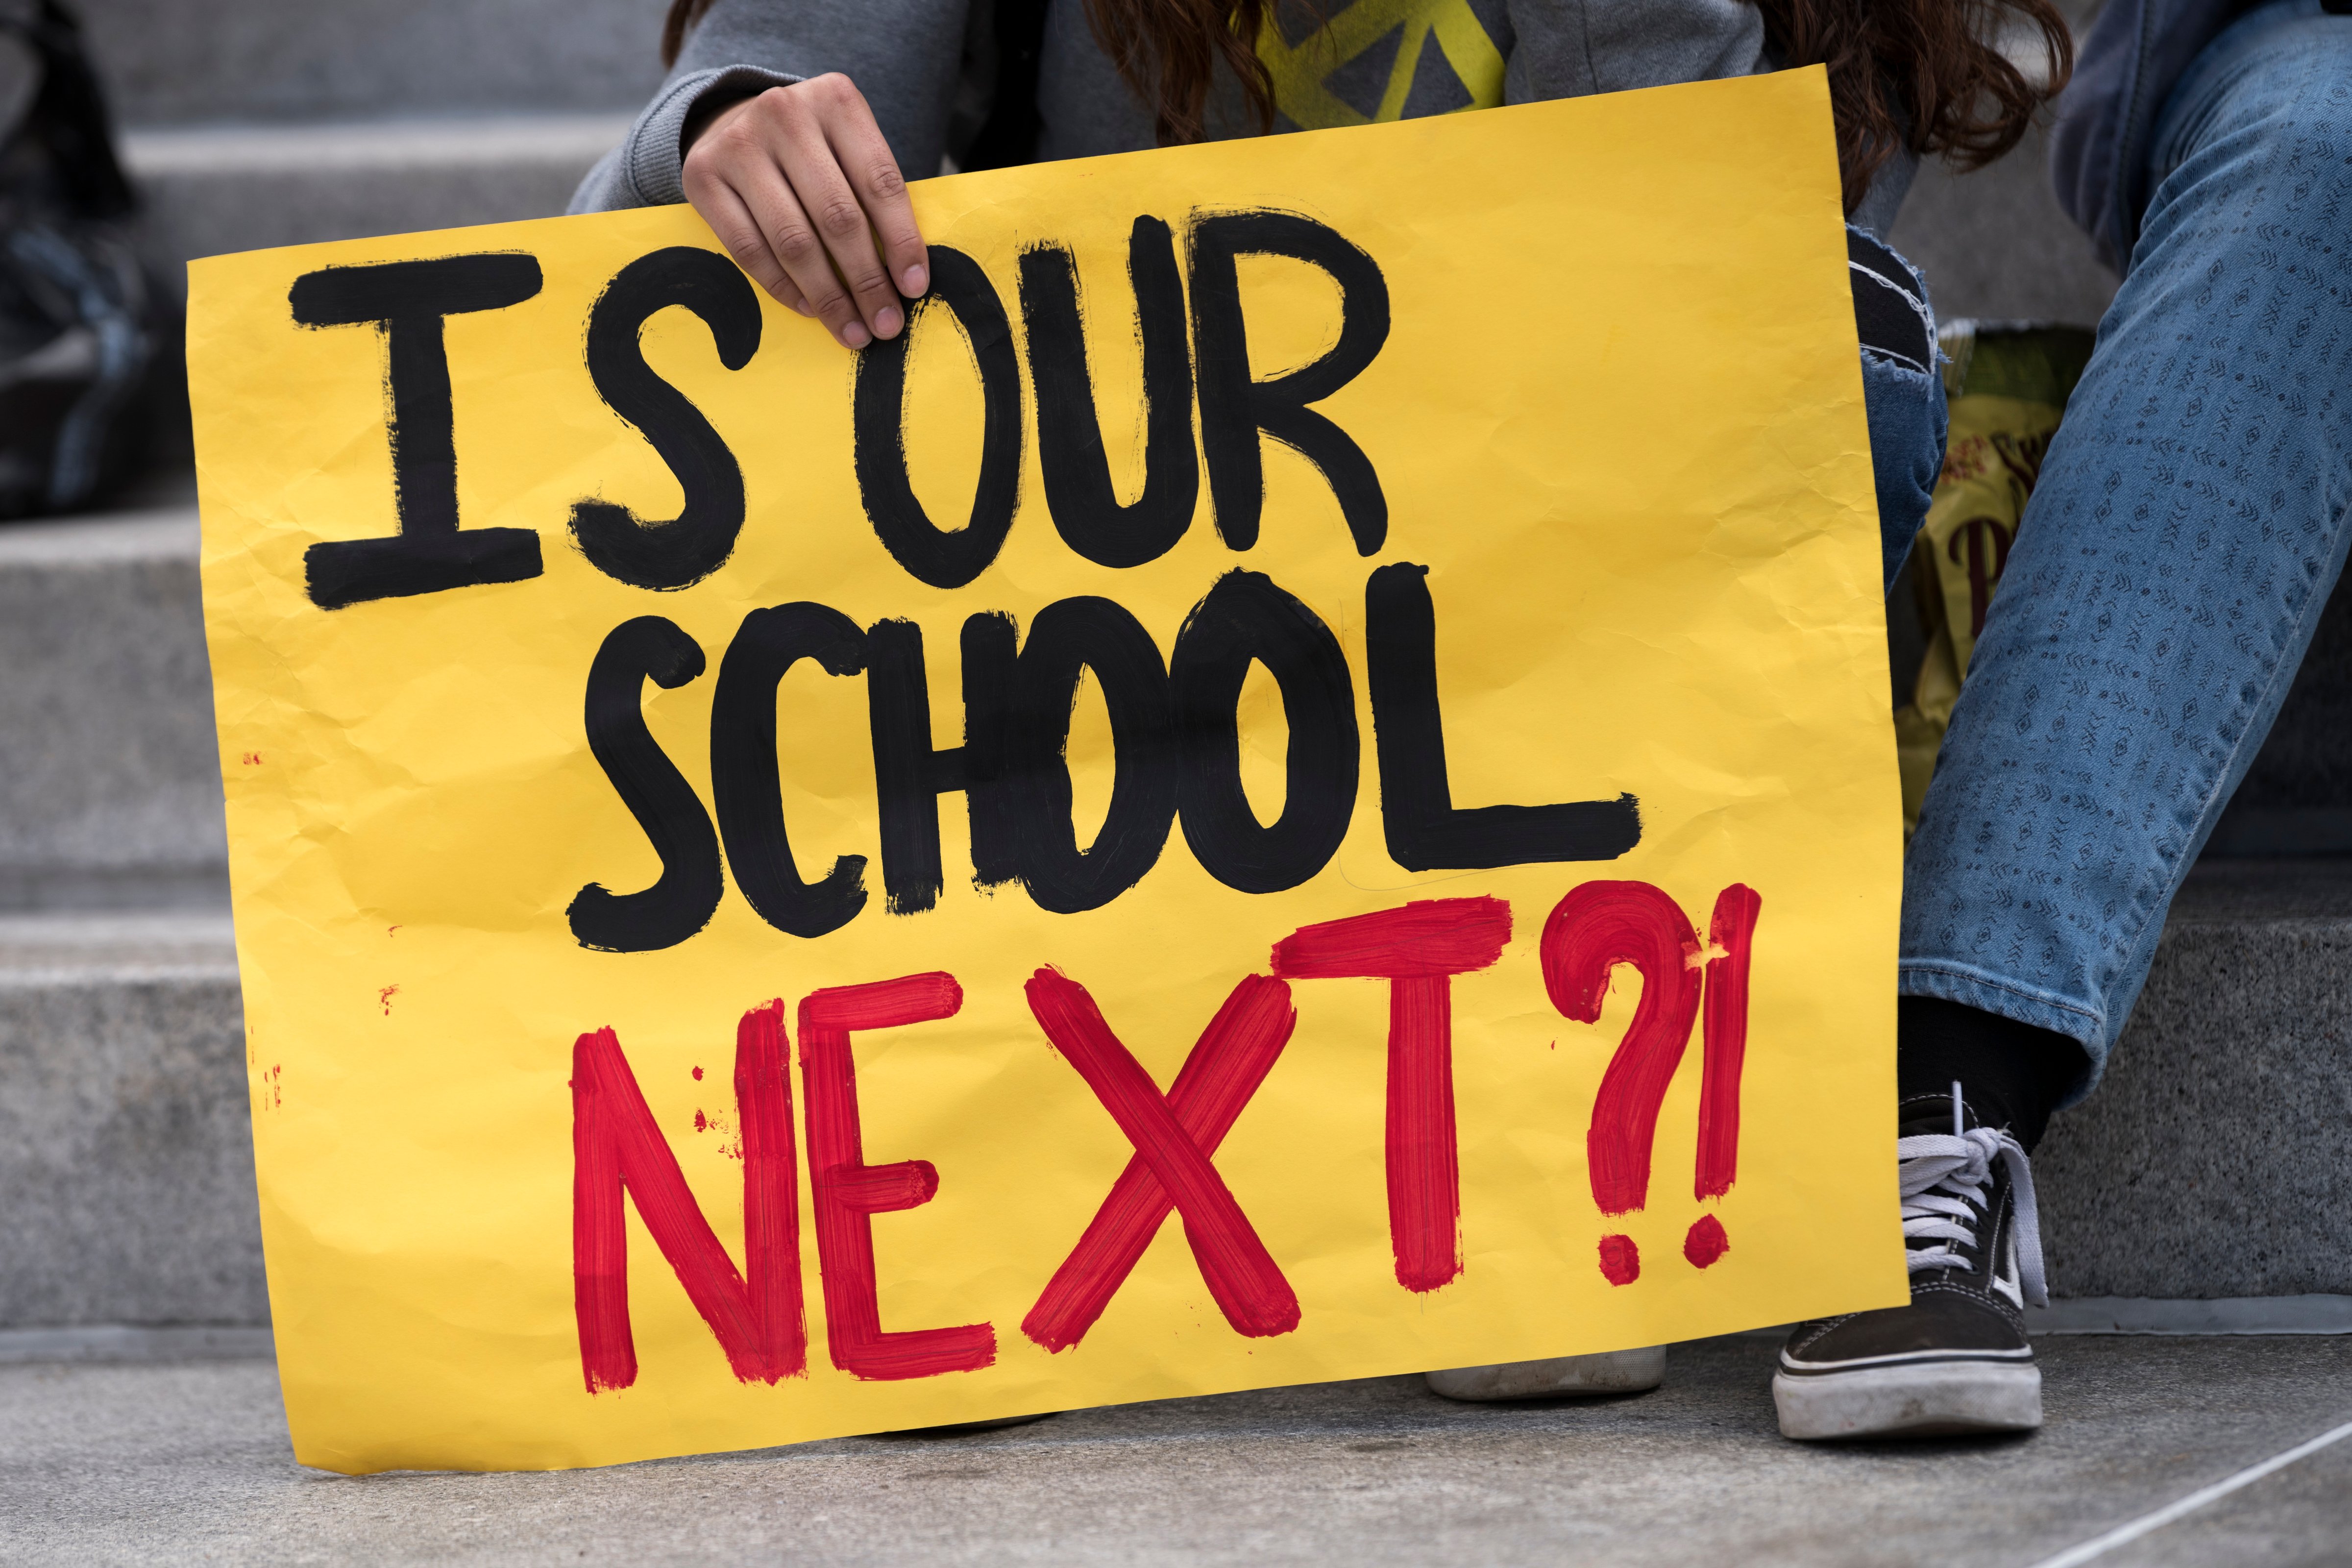 Students participate in a protest against gun violence in Los Angeles, California on March 14, 2018. (Ronen Tivony—NurPhoto/Getty Images)